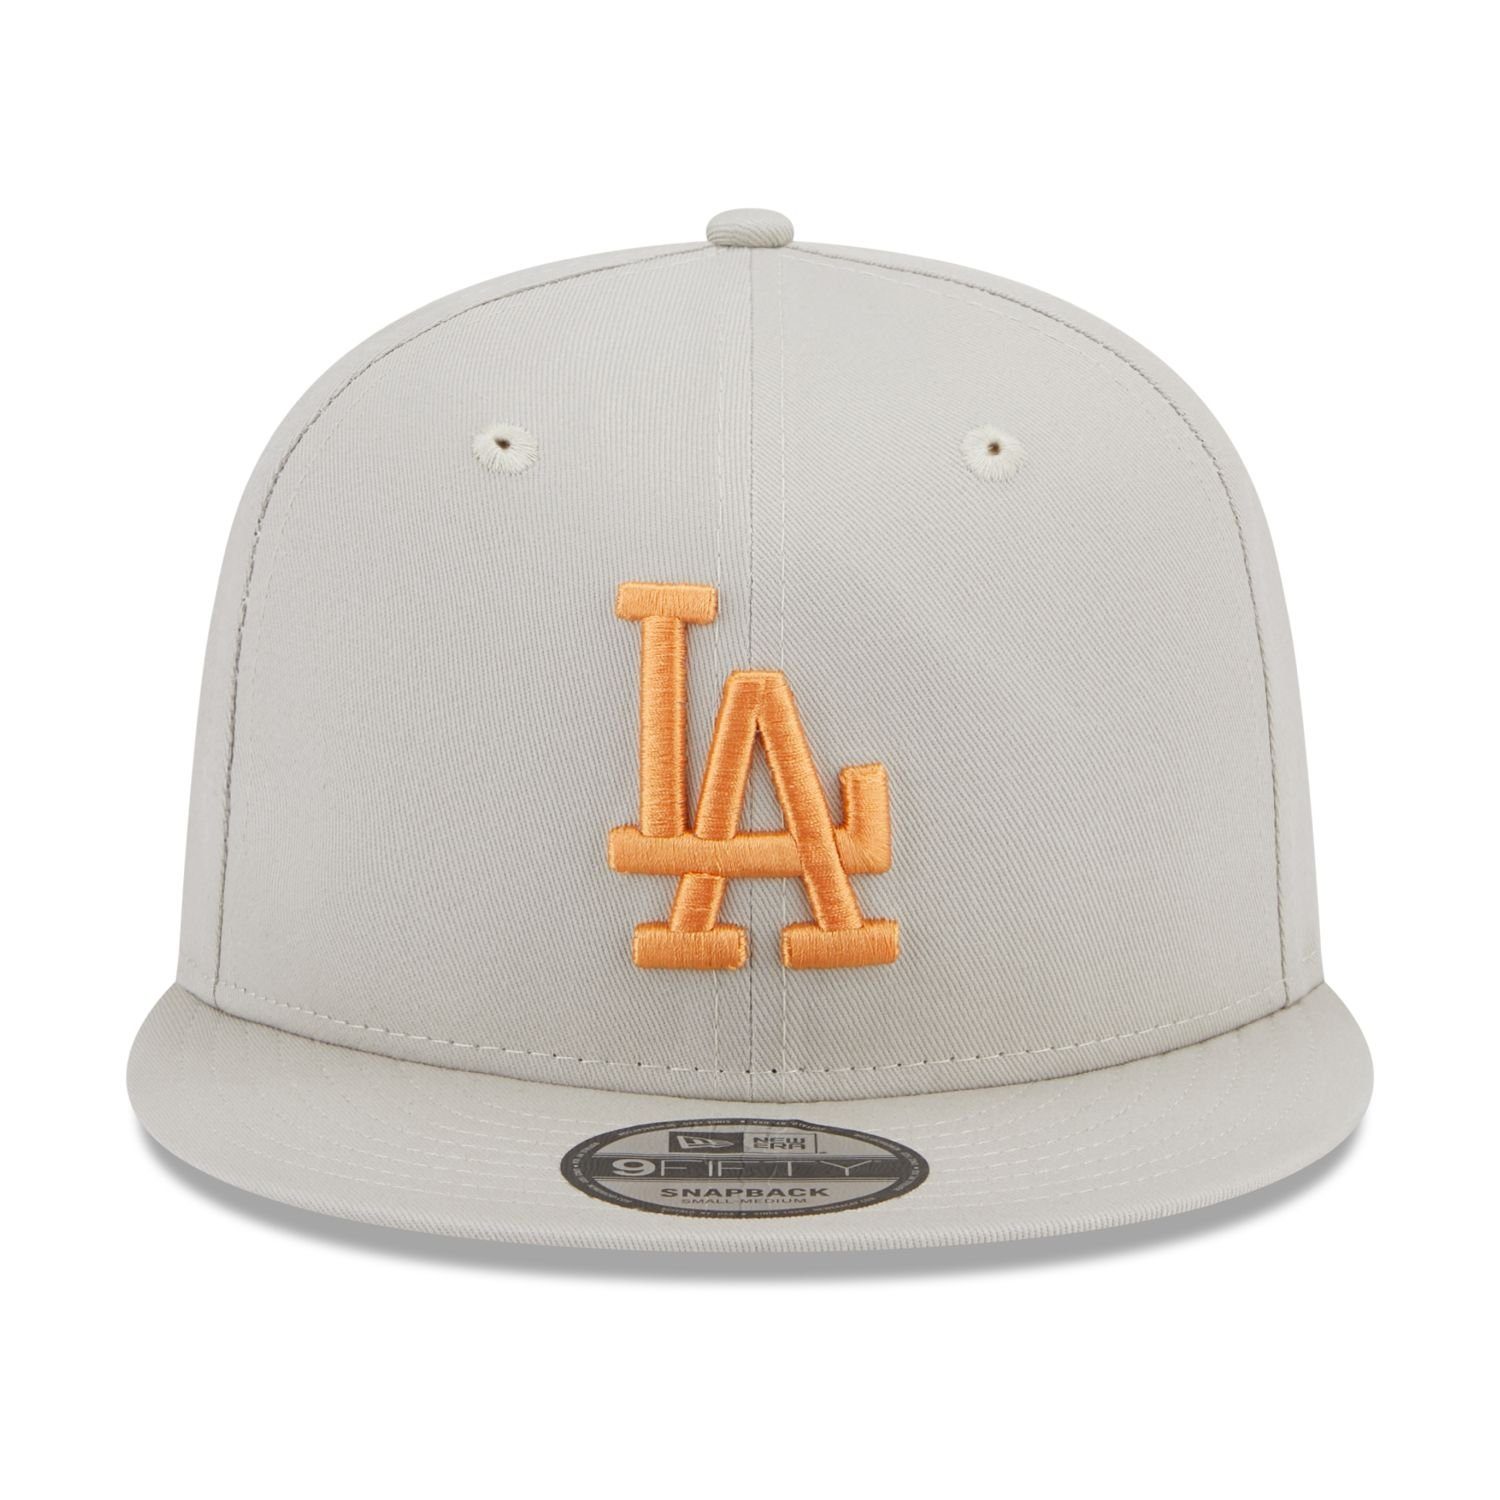 New Era Snapback Cap 9Fifty Los Angeles Dodgers SIDEPATCH